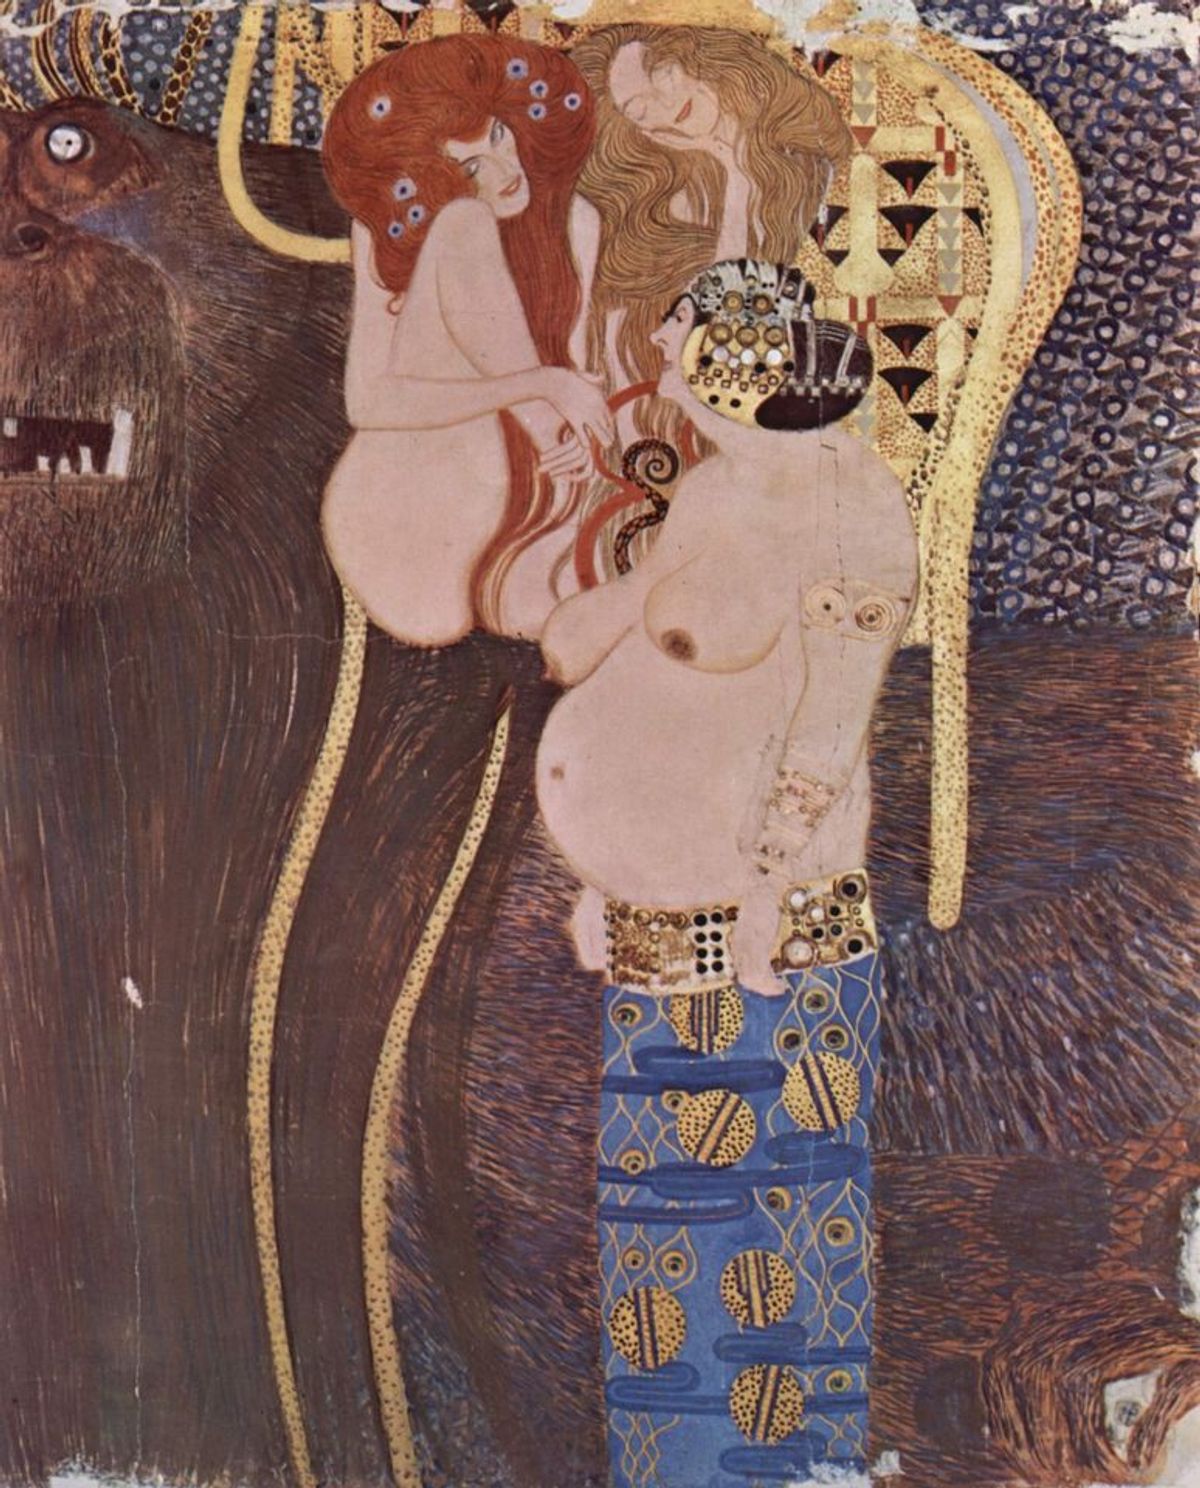 A section from Gustav Klimt's Beethoven Frieze (1902), which was looted by Nazis The Yorck Project (2002) 10.000 Meisterwerke der Malerei, distributed by Directmedia via Wikicommons